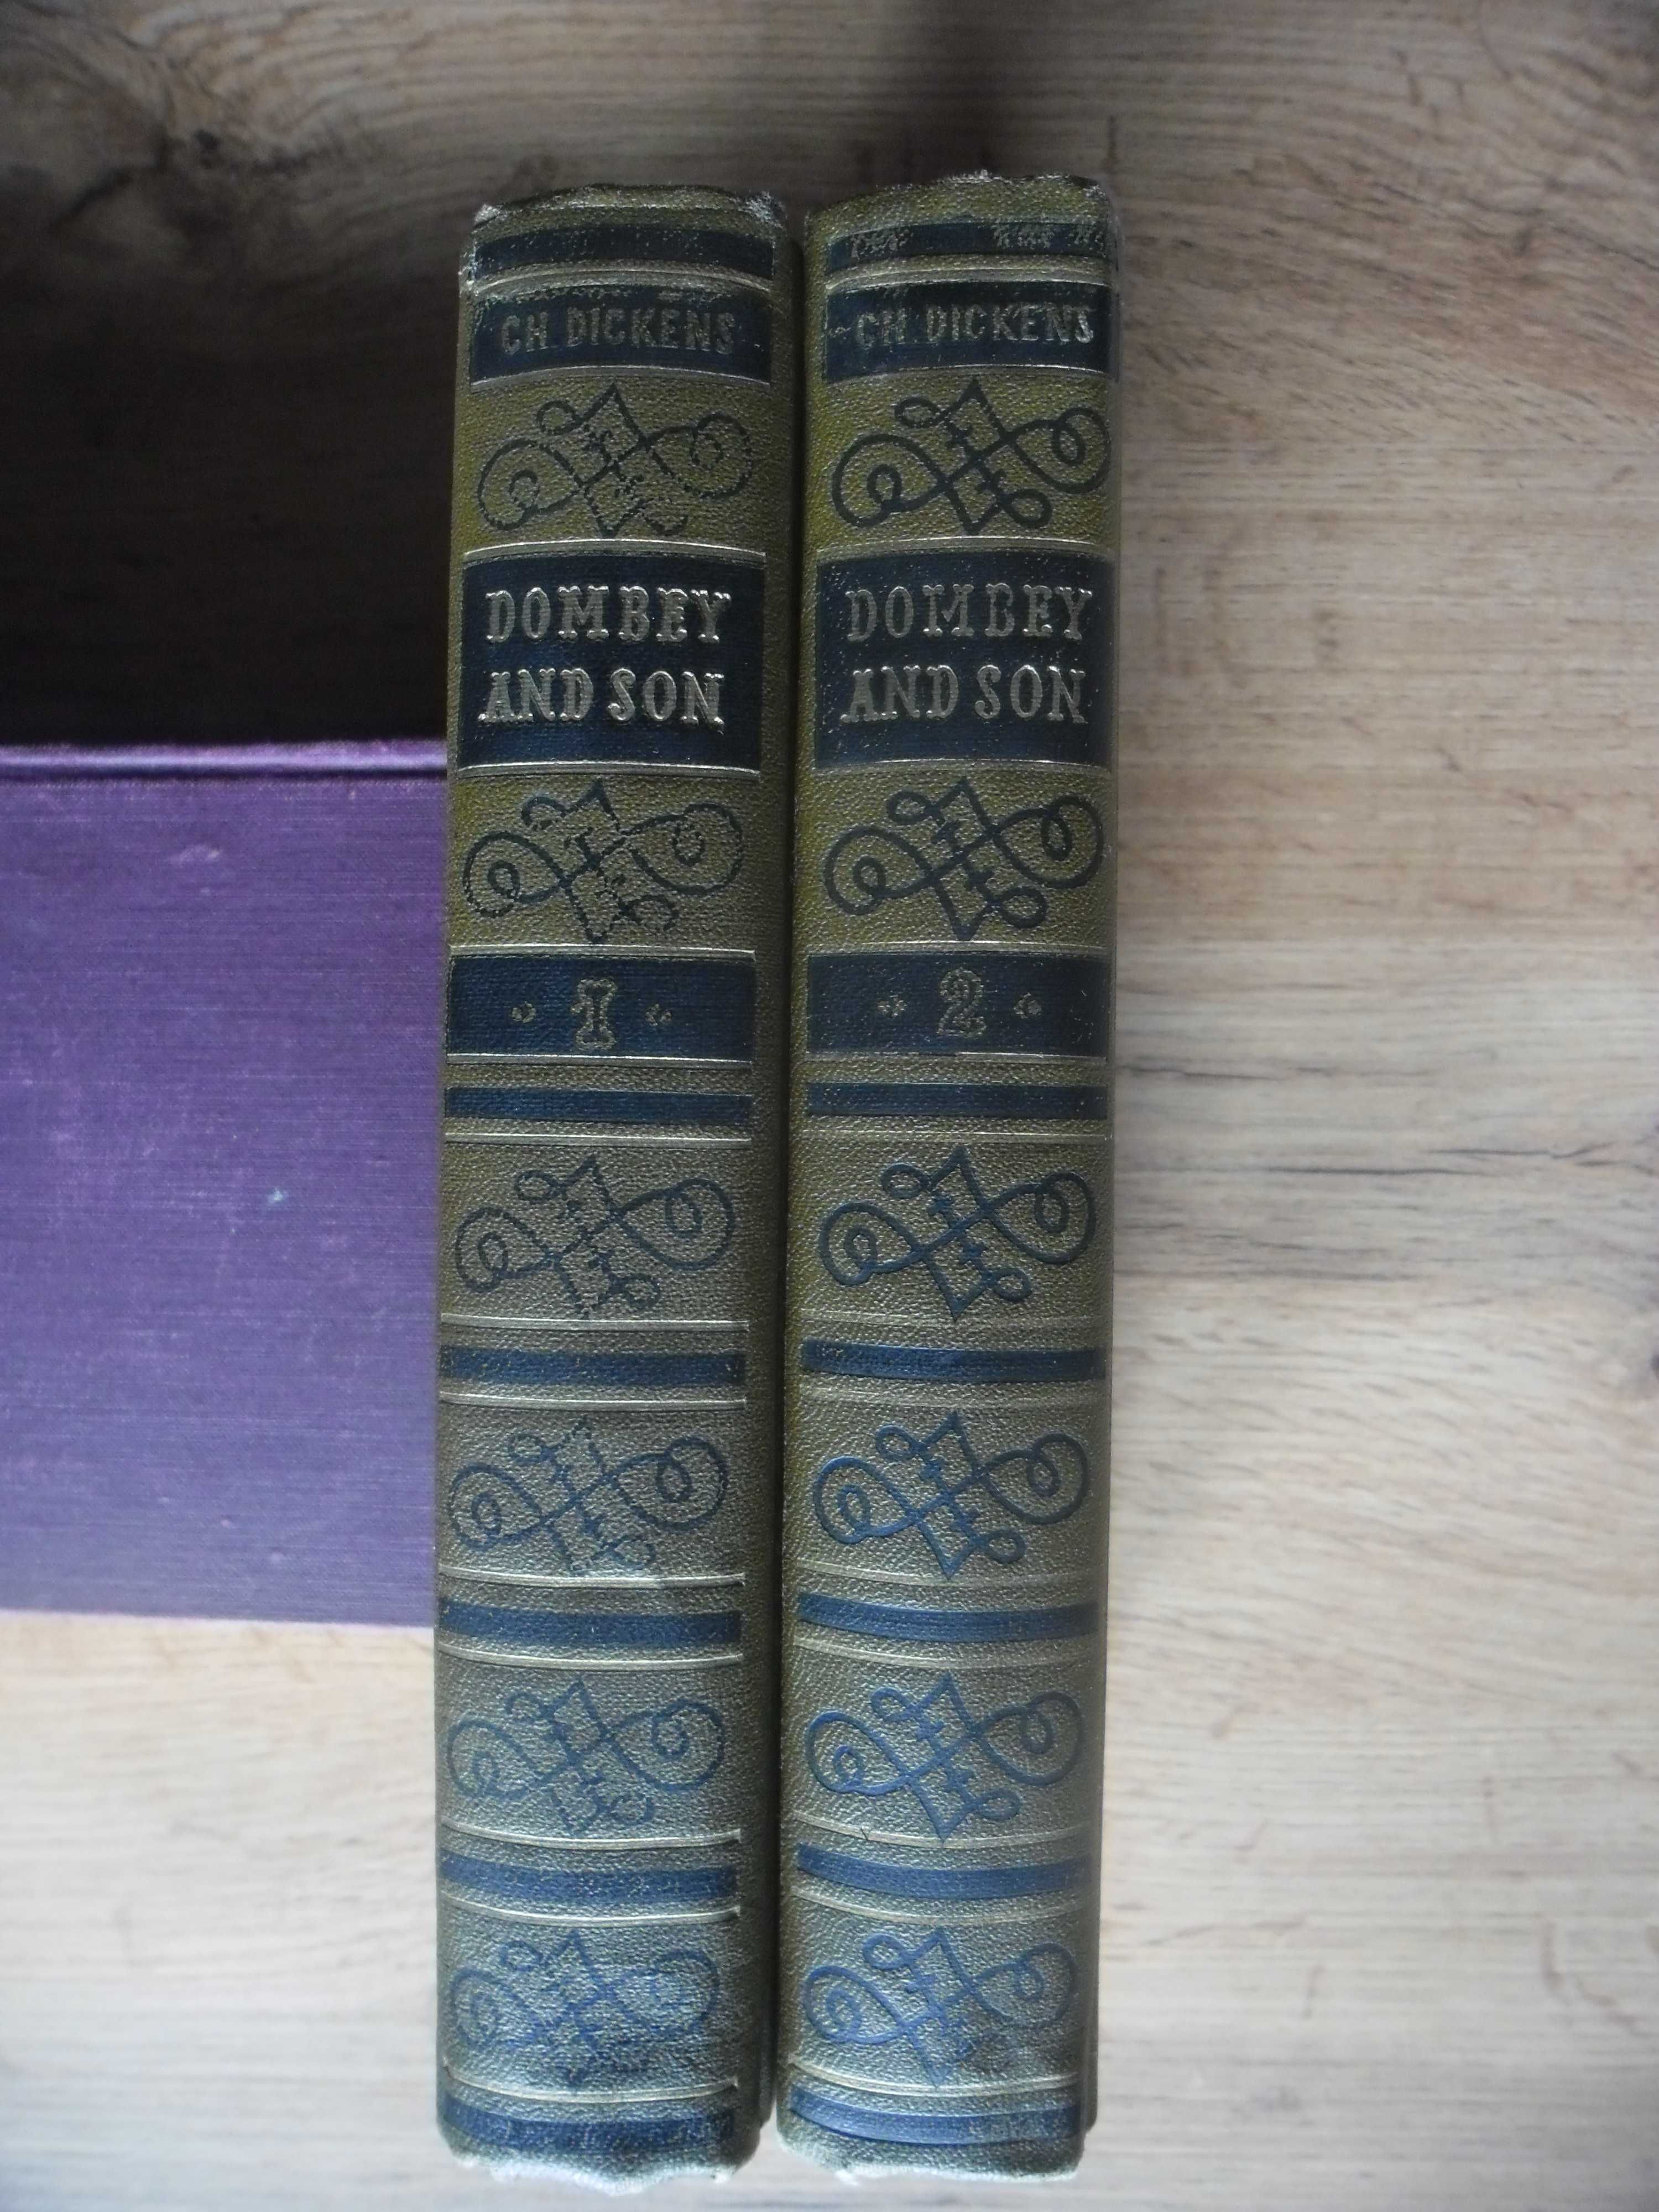 Charles Dickens Dombey and Son Nicholas Nickleby